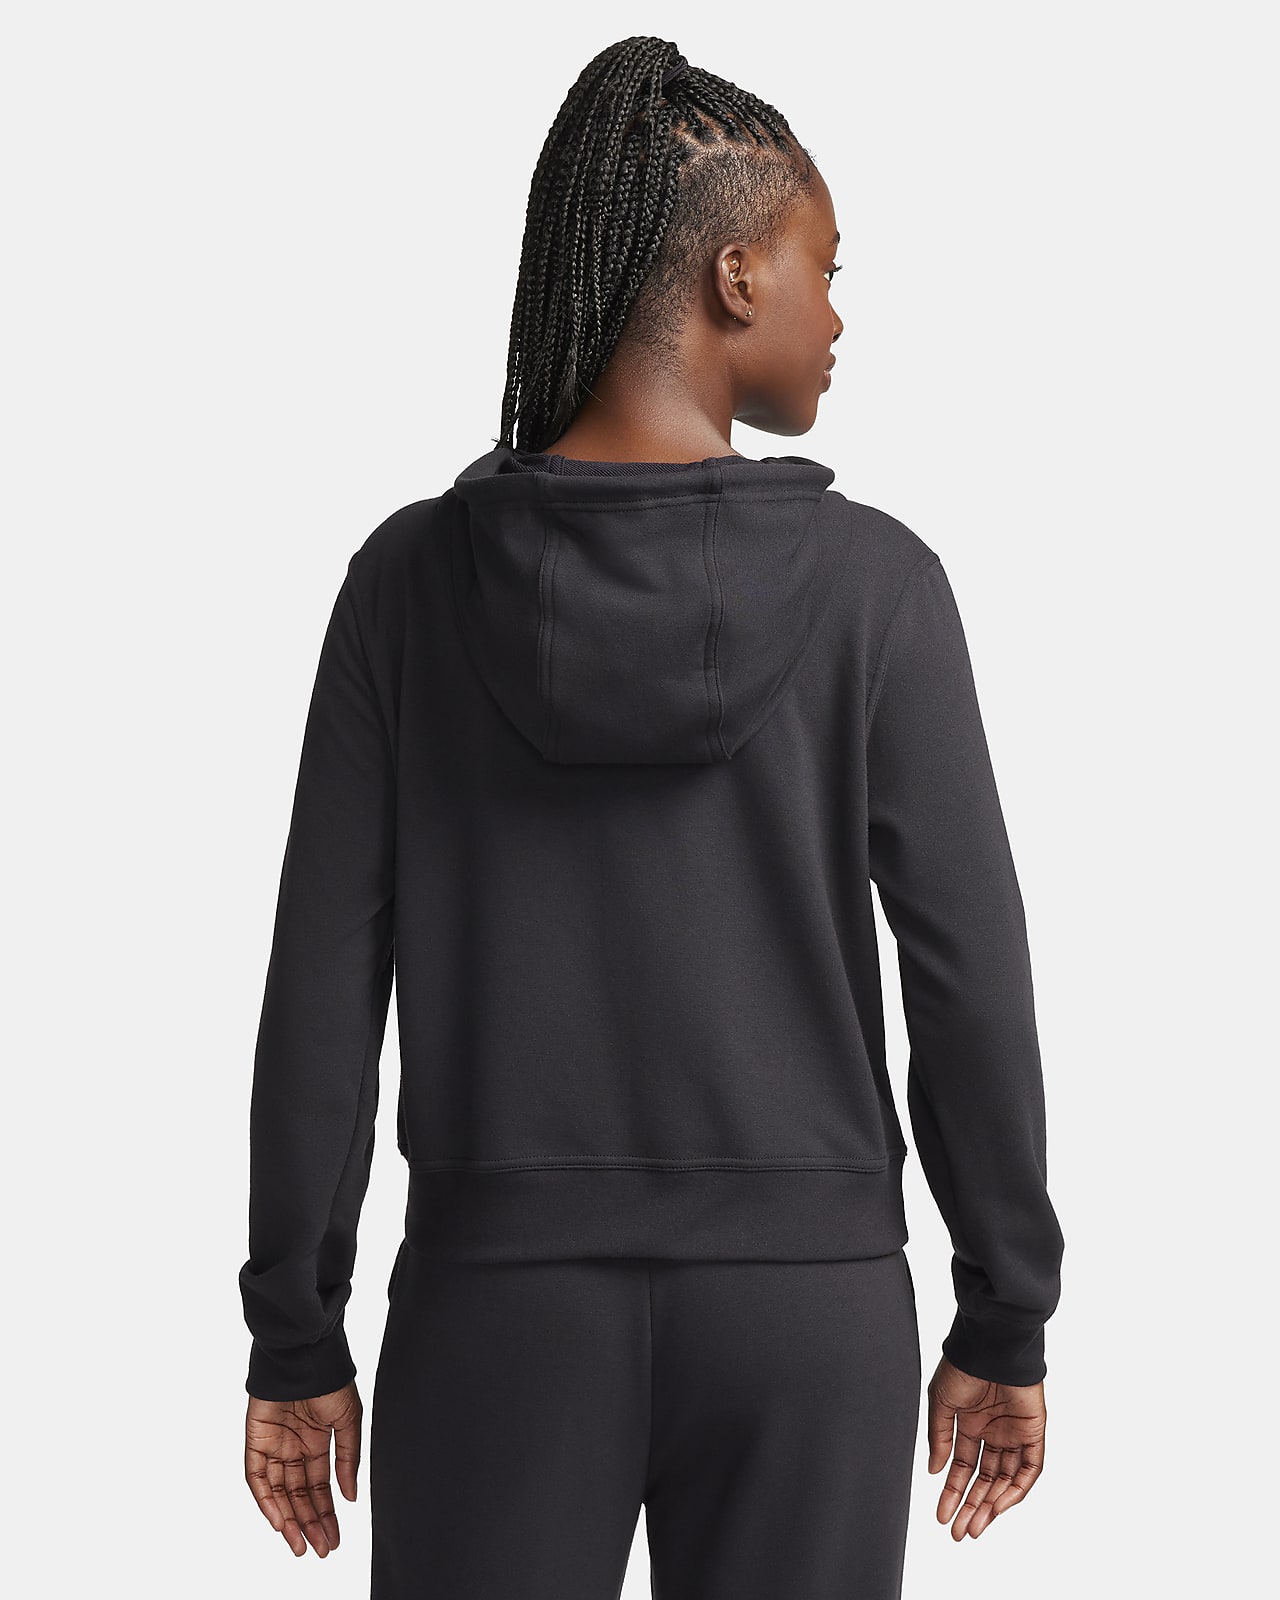 Nike Dri-FIT One Women's French Terry Graphic Hoodie.